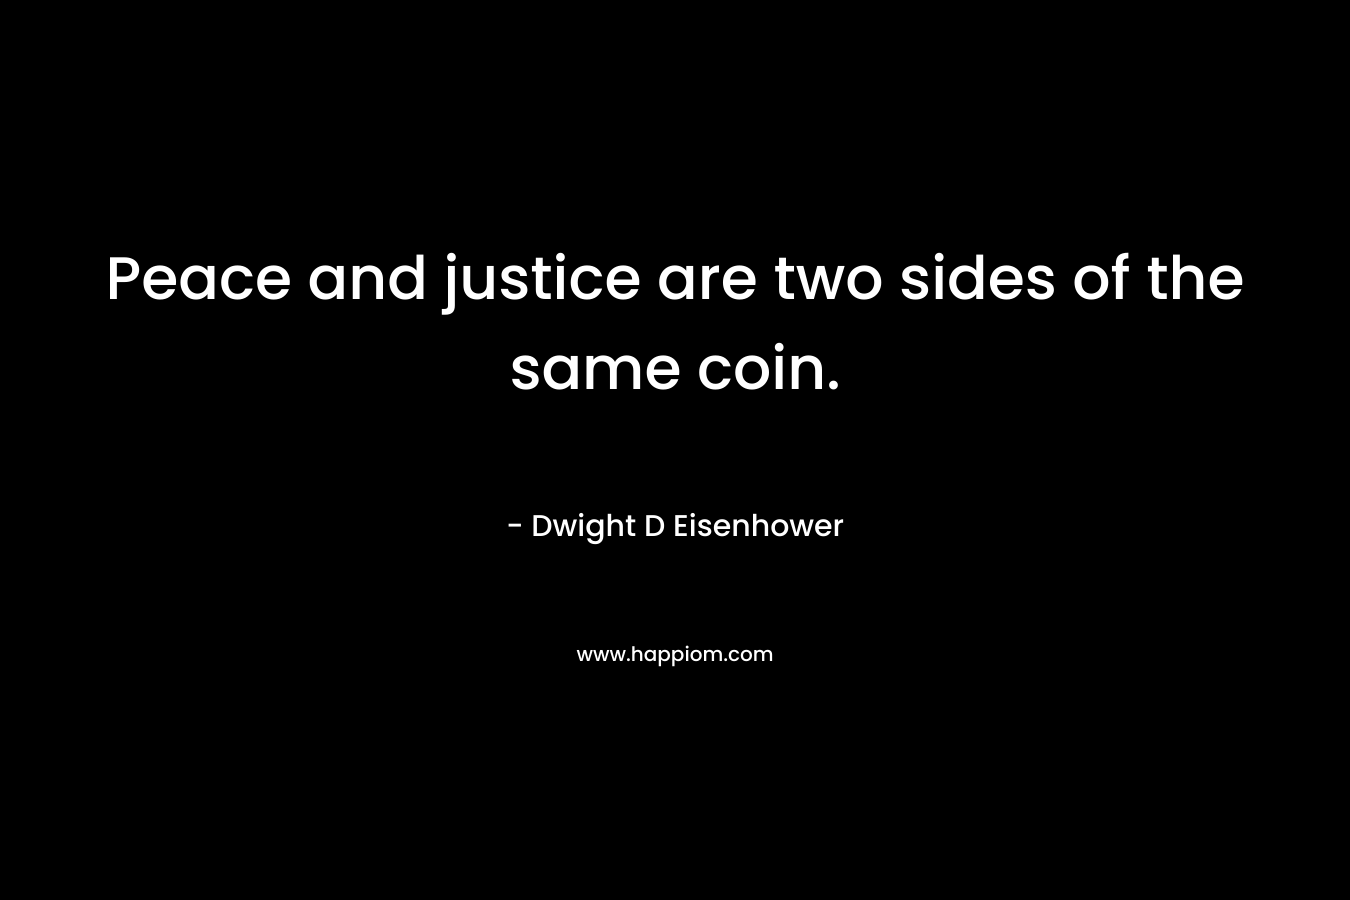 Peace and justice are two sides of the same coin.